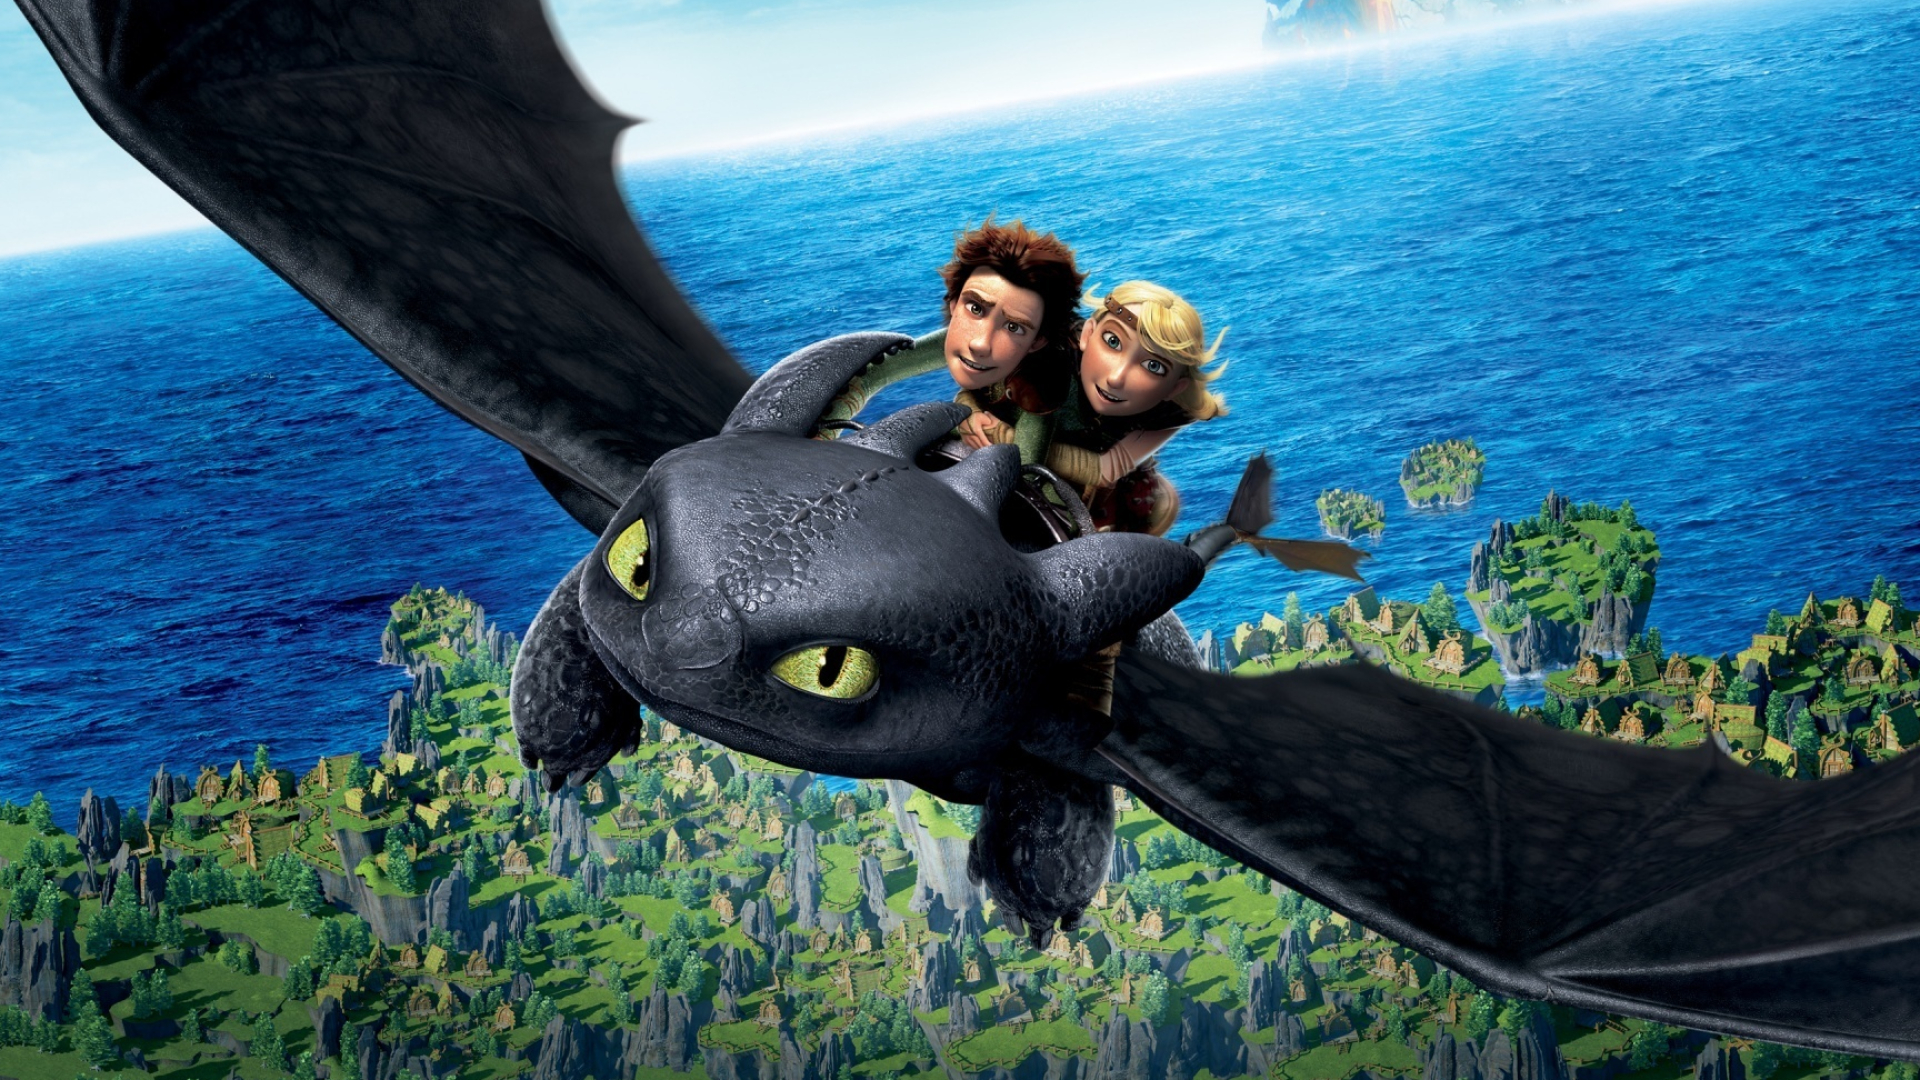 DreamWorks: How to Train your Dragon, Produced by DWA and distributed by Paramount Pictures. 1920x1080 Full HD Wallpaper.